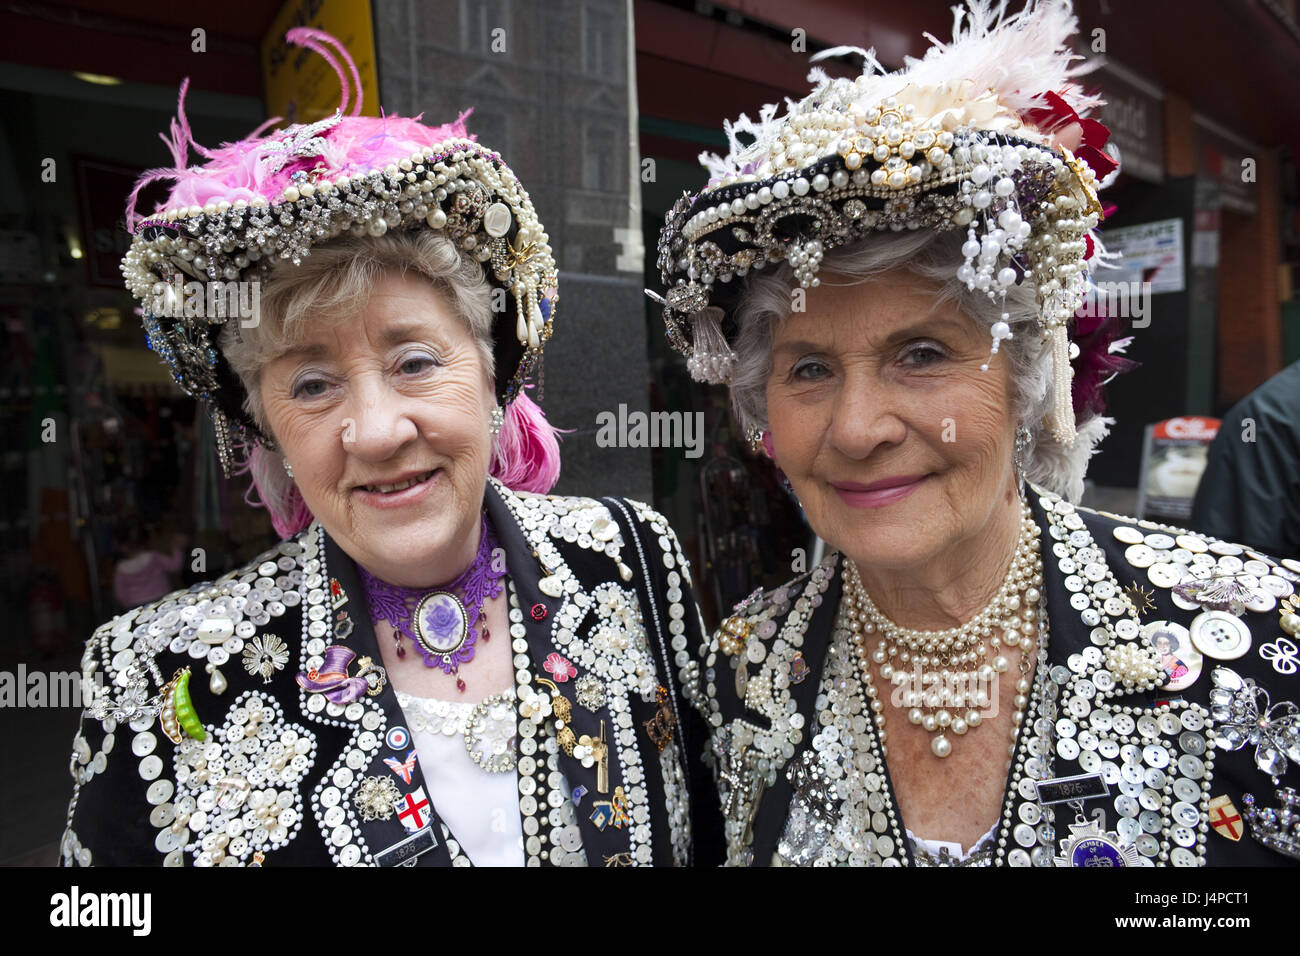 Great Britain, England, London, Pearly Queen, no model release, Stock Photo